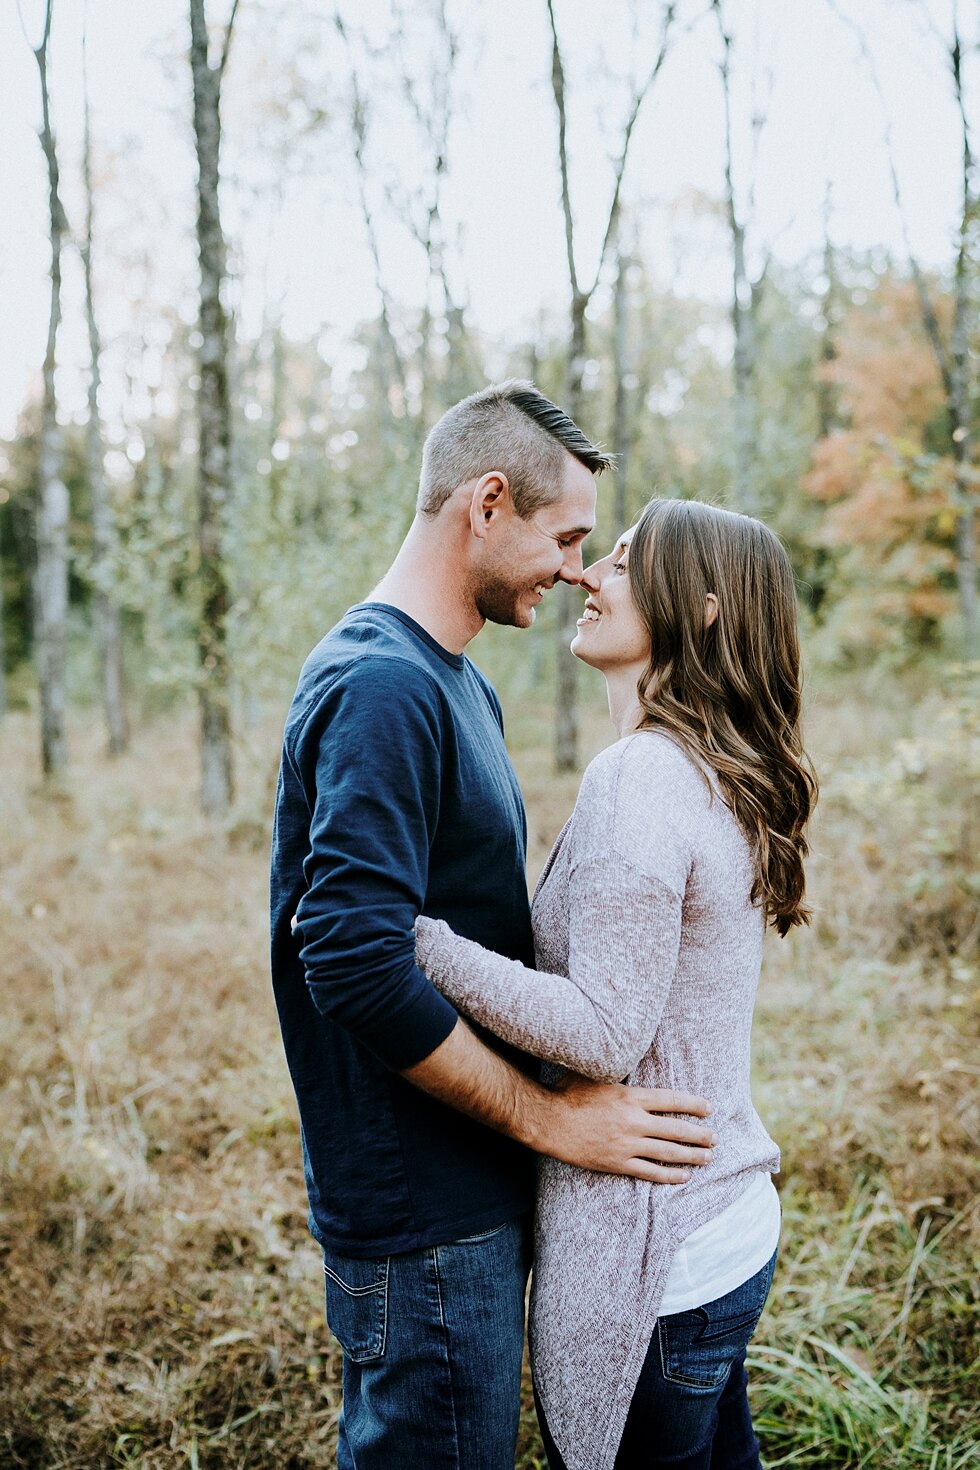  Even through almost all the leaves had fallen off the trees, this forest made for an awesome photo shoot location for this engaged couple #engagementgoals #engagementphotographer #engaged #outdoorengagement #kentuckyphotographer #indianaphotographer